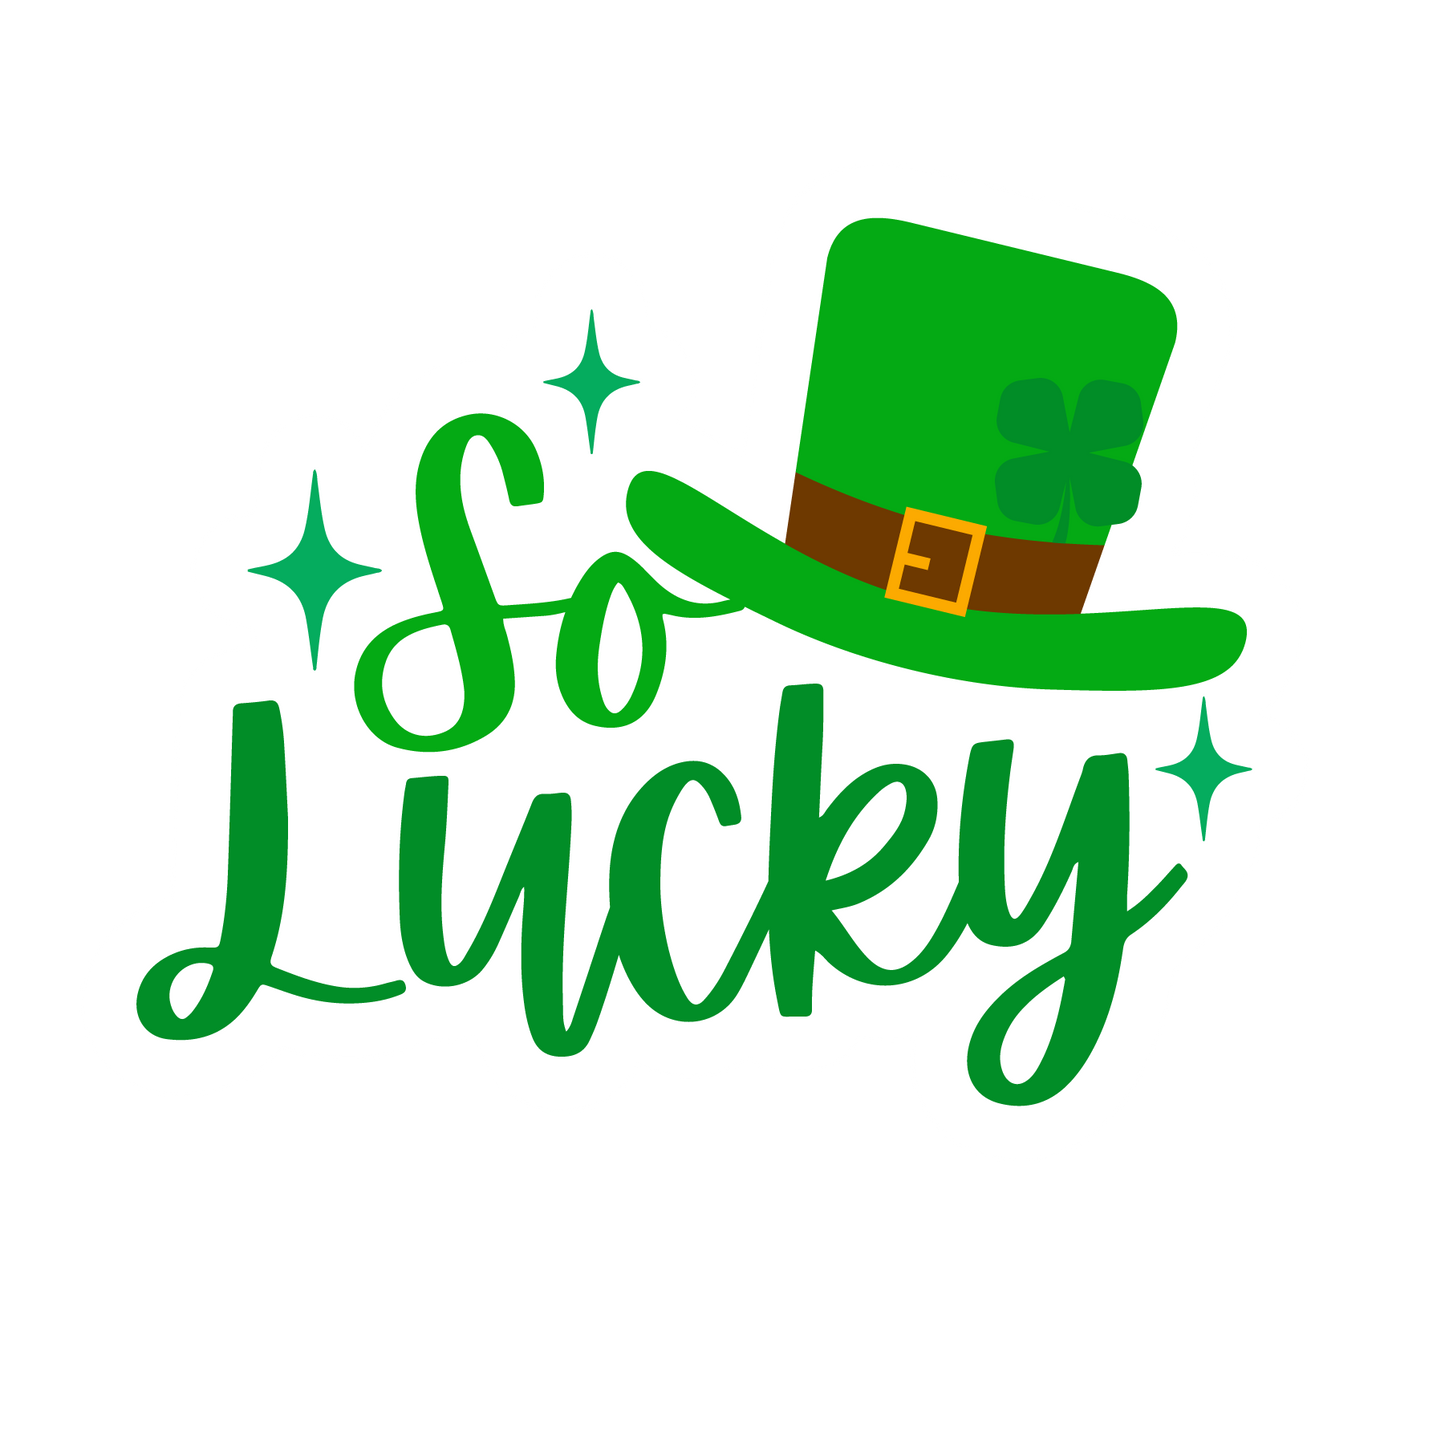 Inspirational Quote So Lucky. Motivational Sticker Vinyl Decal Motivation Stickers- 5" Vinyl Sticker Waterproof